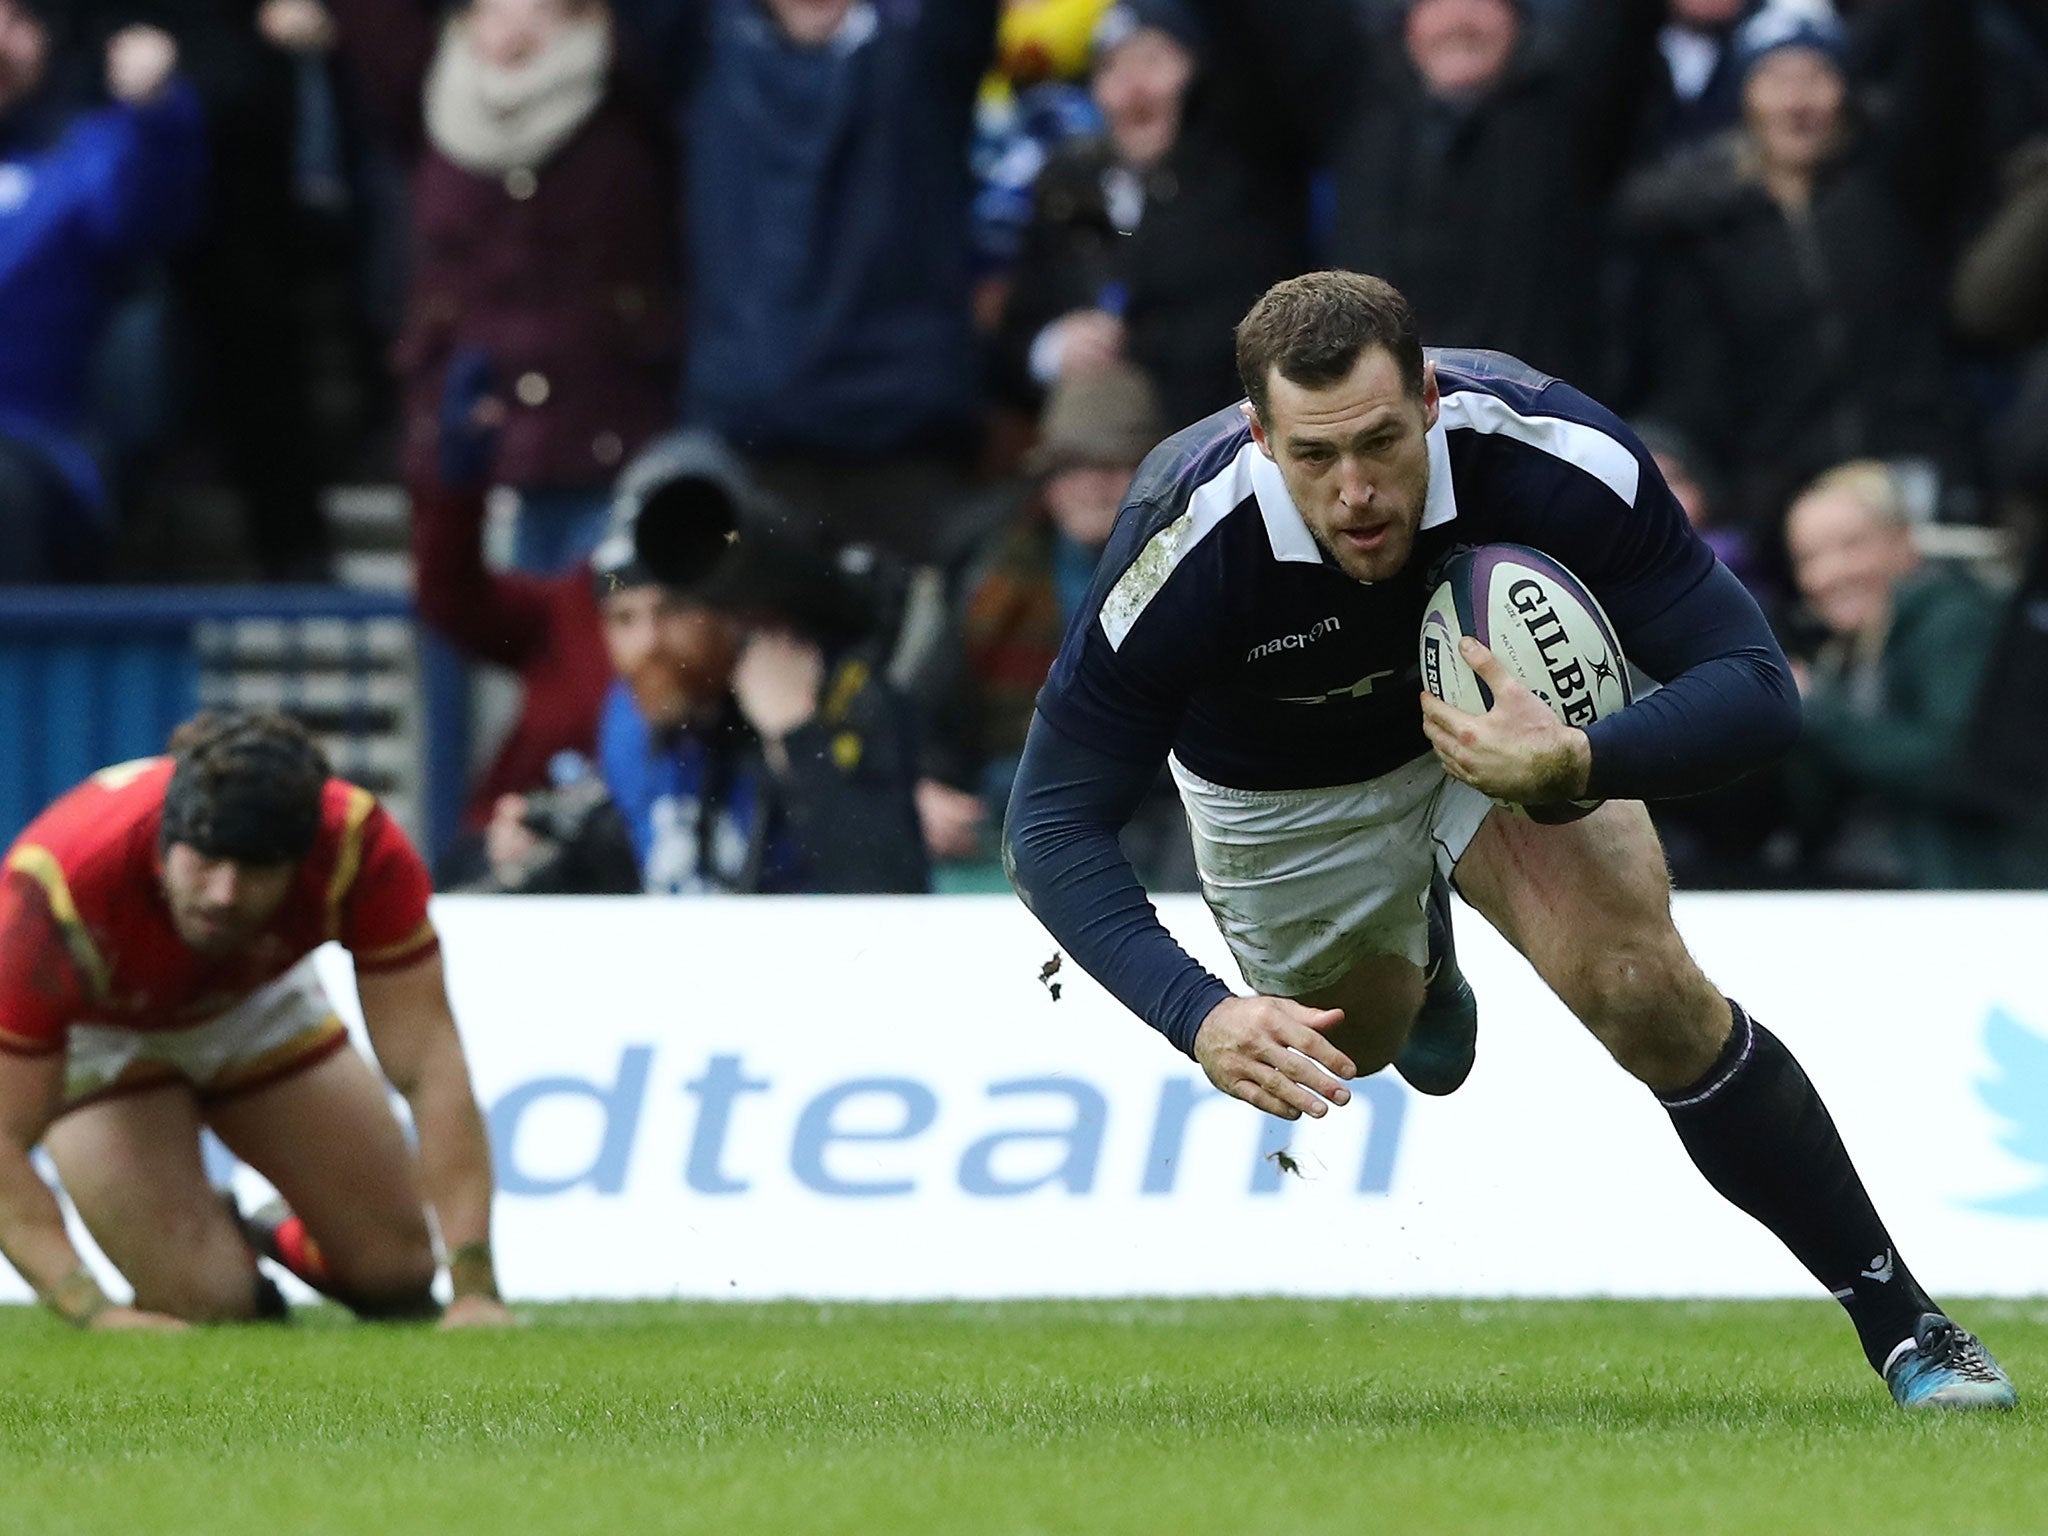 Tim Visser dives over to score Scotland's second try against Wales